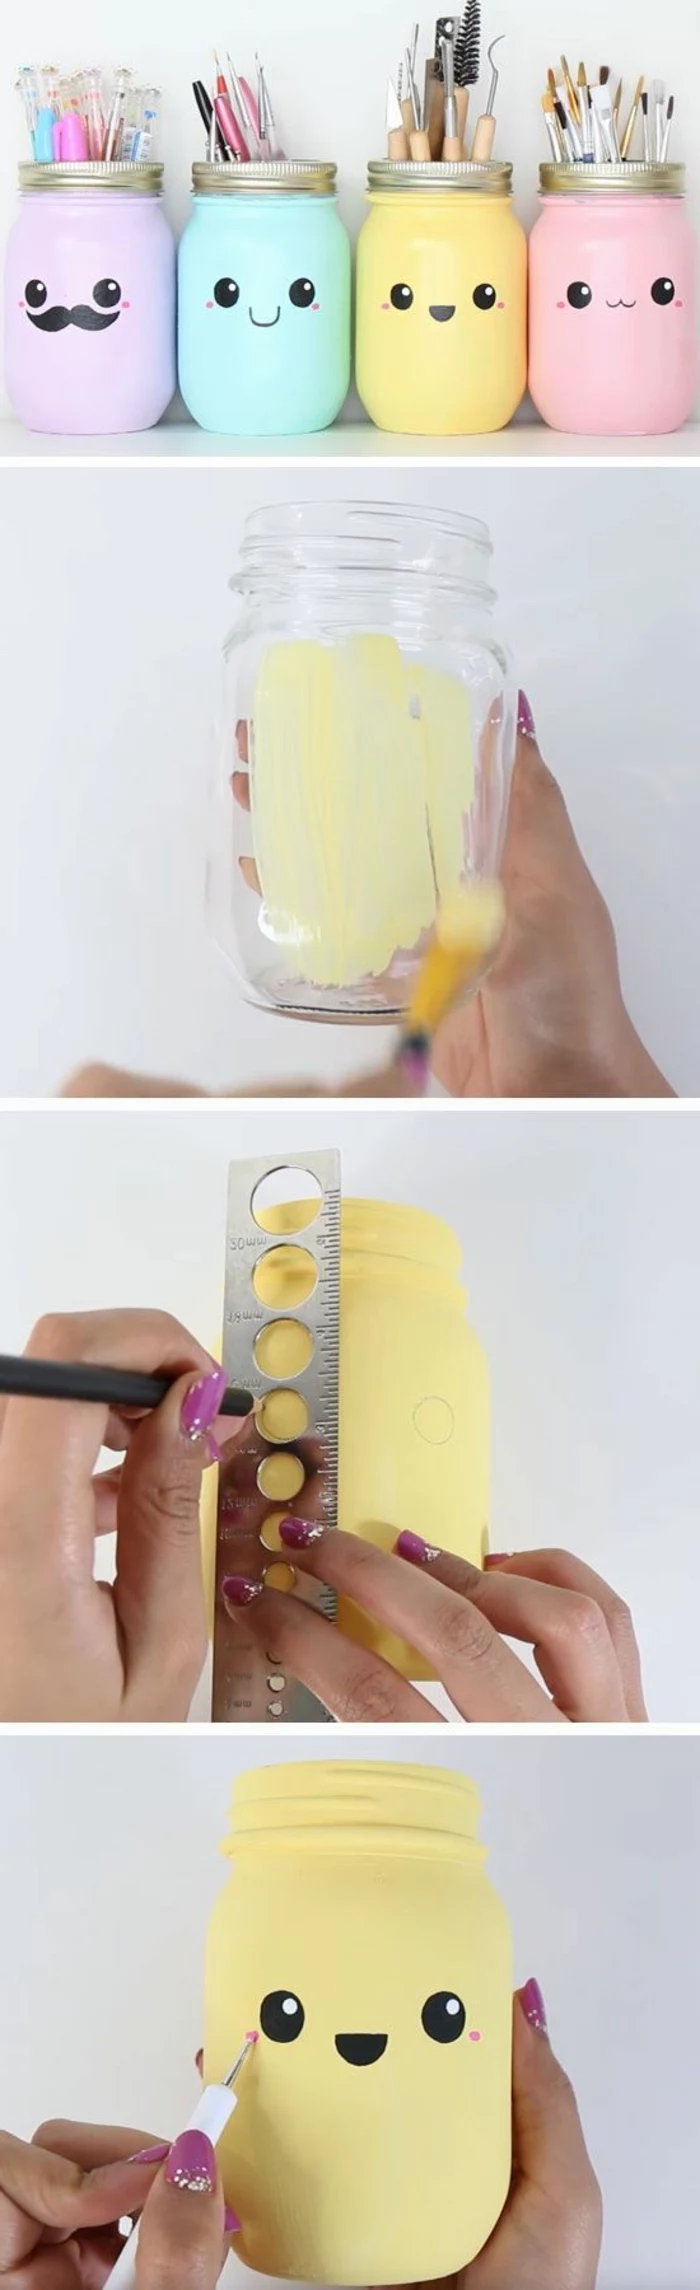 mason jars, turned into pencil holders, purple and blue, yellow and pink paint, fun crafts for teens